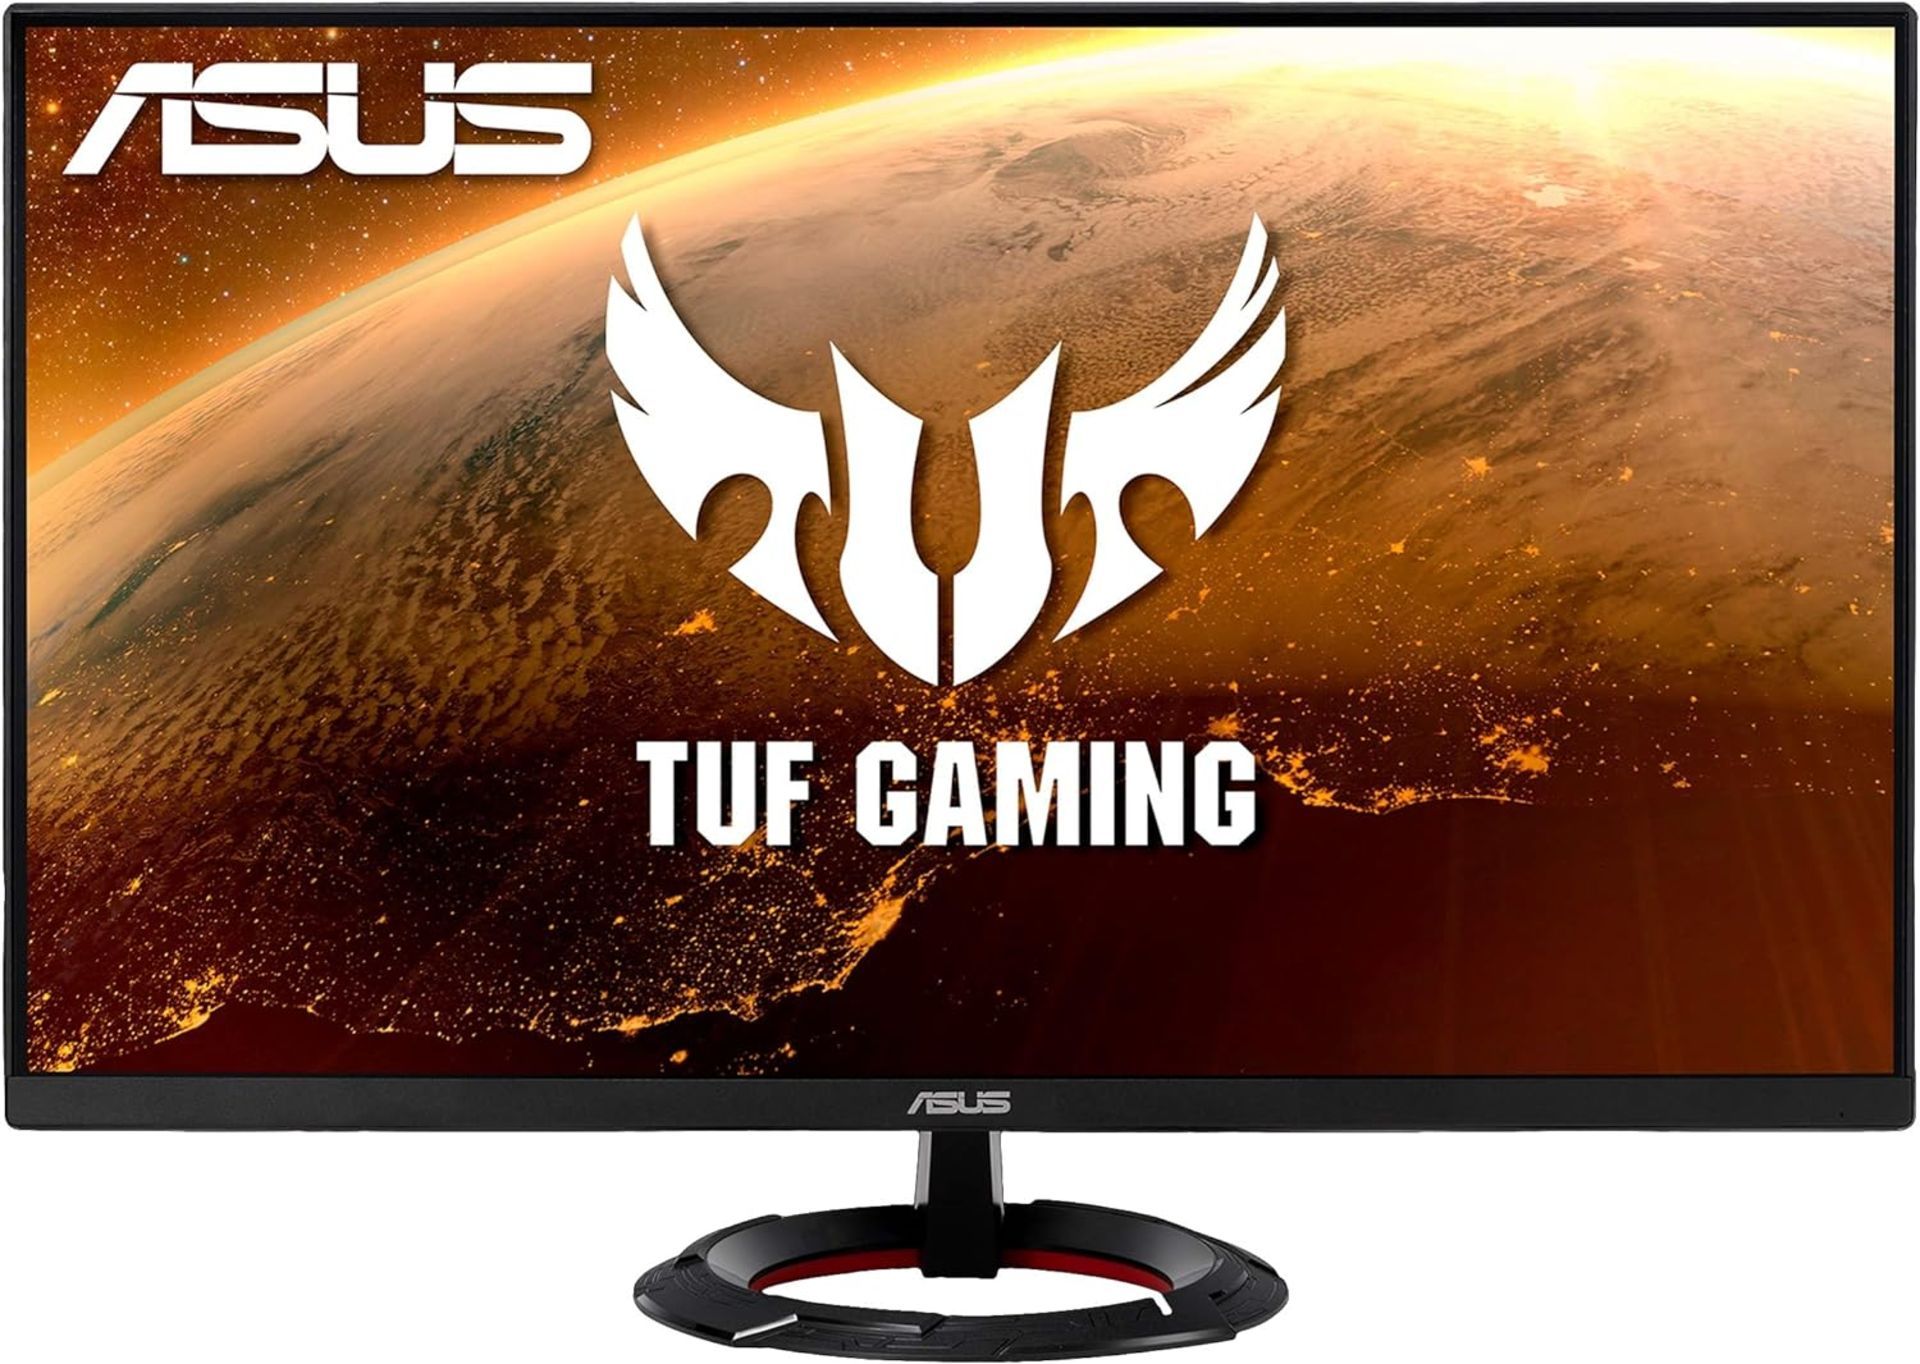 BRAND NEW FACTORY SEALED ASUS TUF VG279Q1R 27 Inch 144hz Gaming Monitor. RRP £249. (PCKBW). 27- - Image 2 of 3